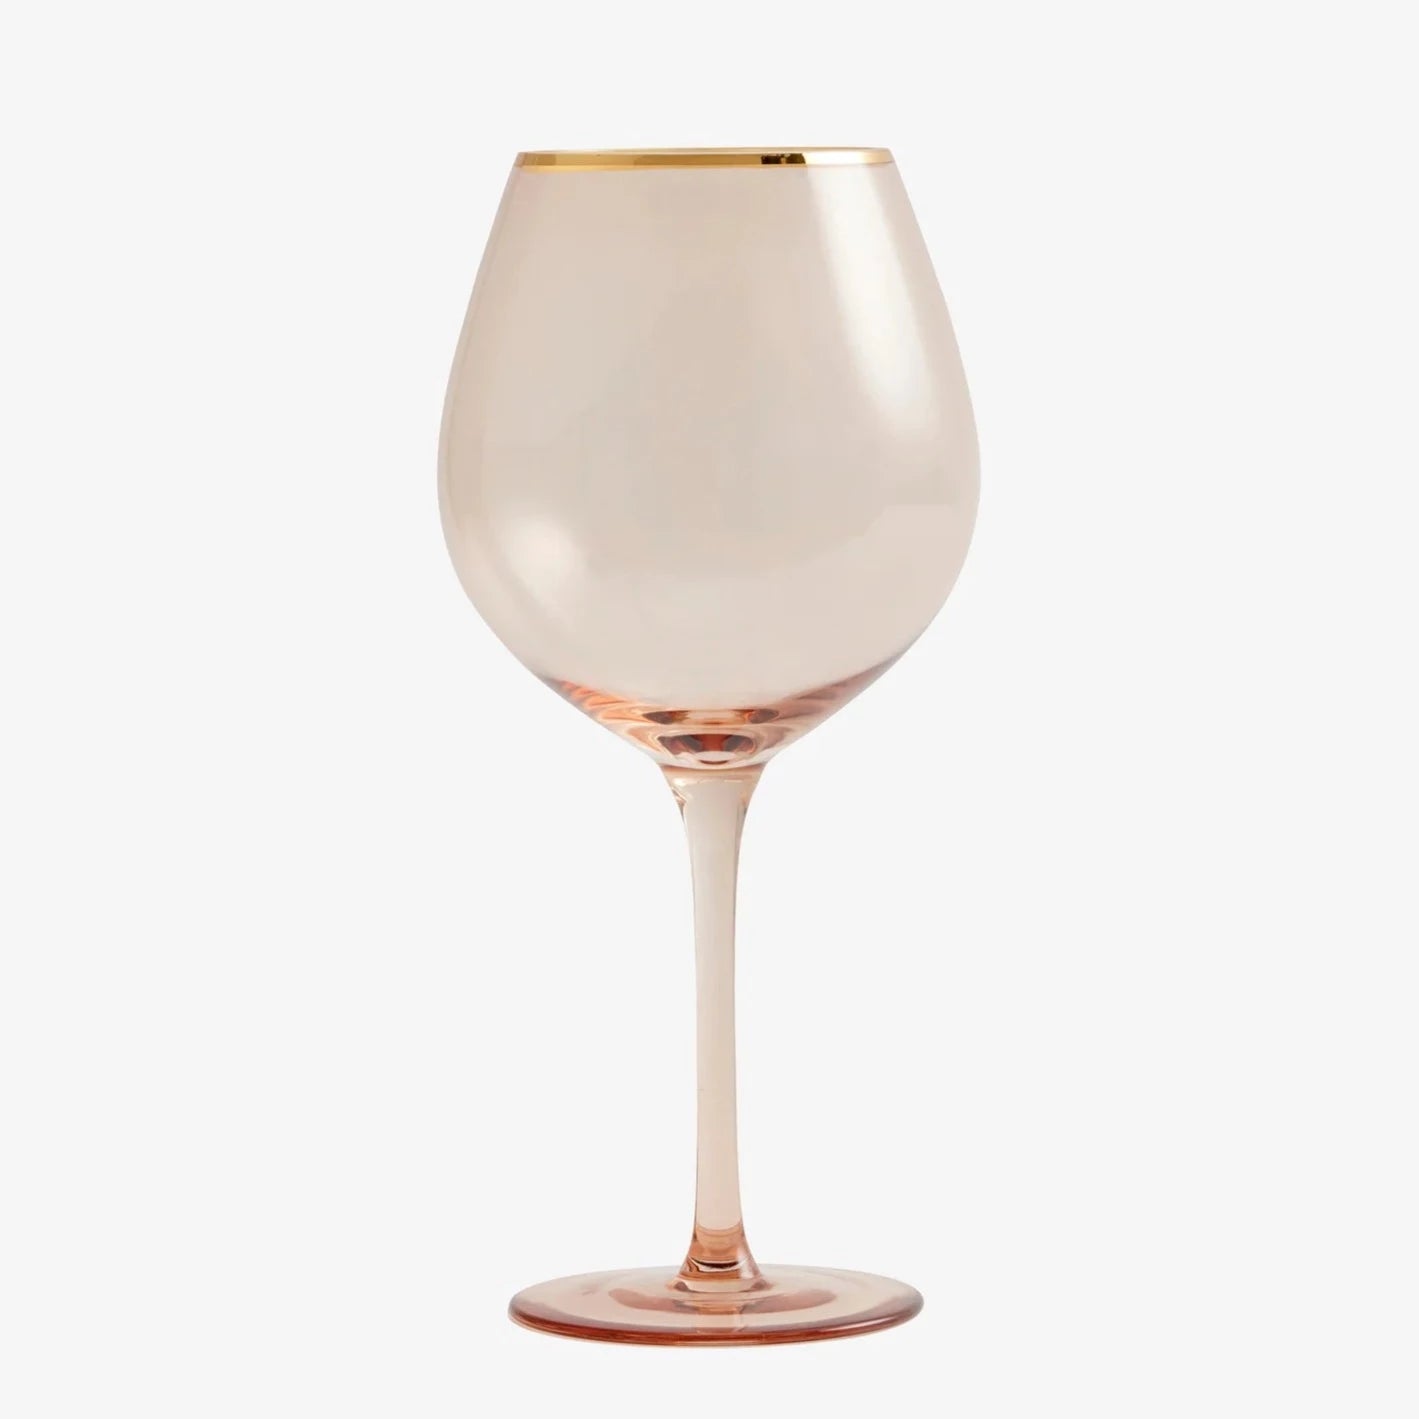 Goldie wine glass with Gold rim